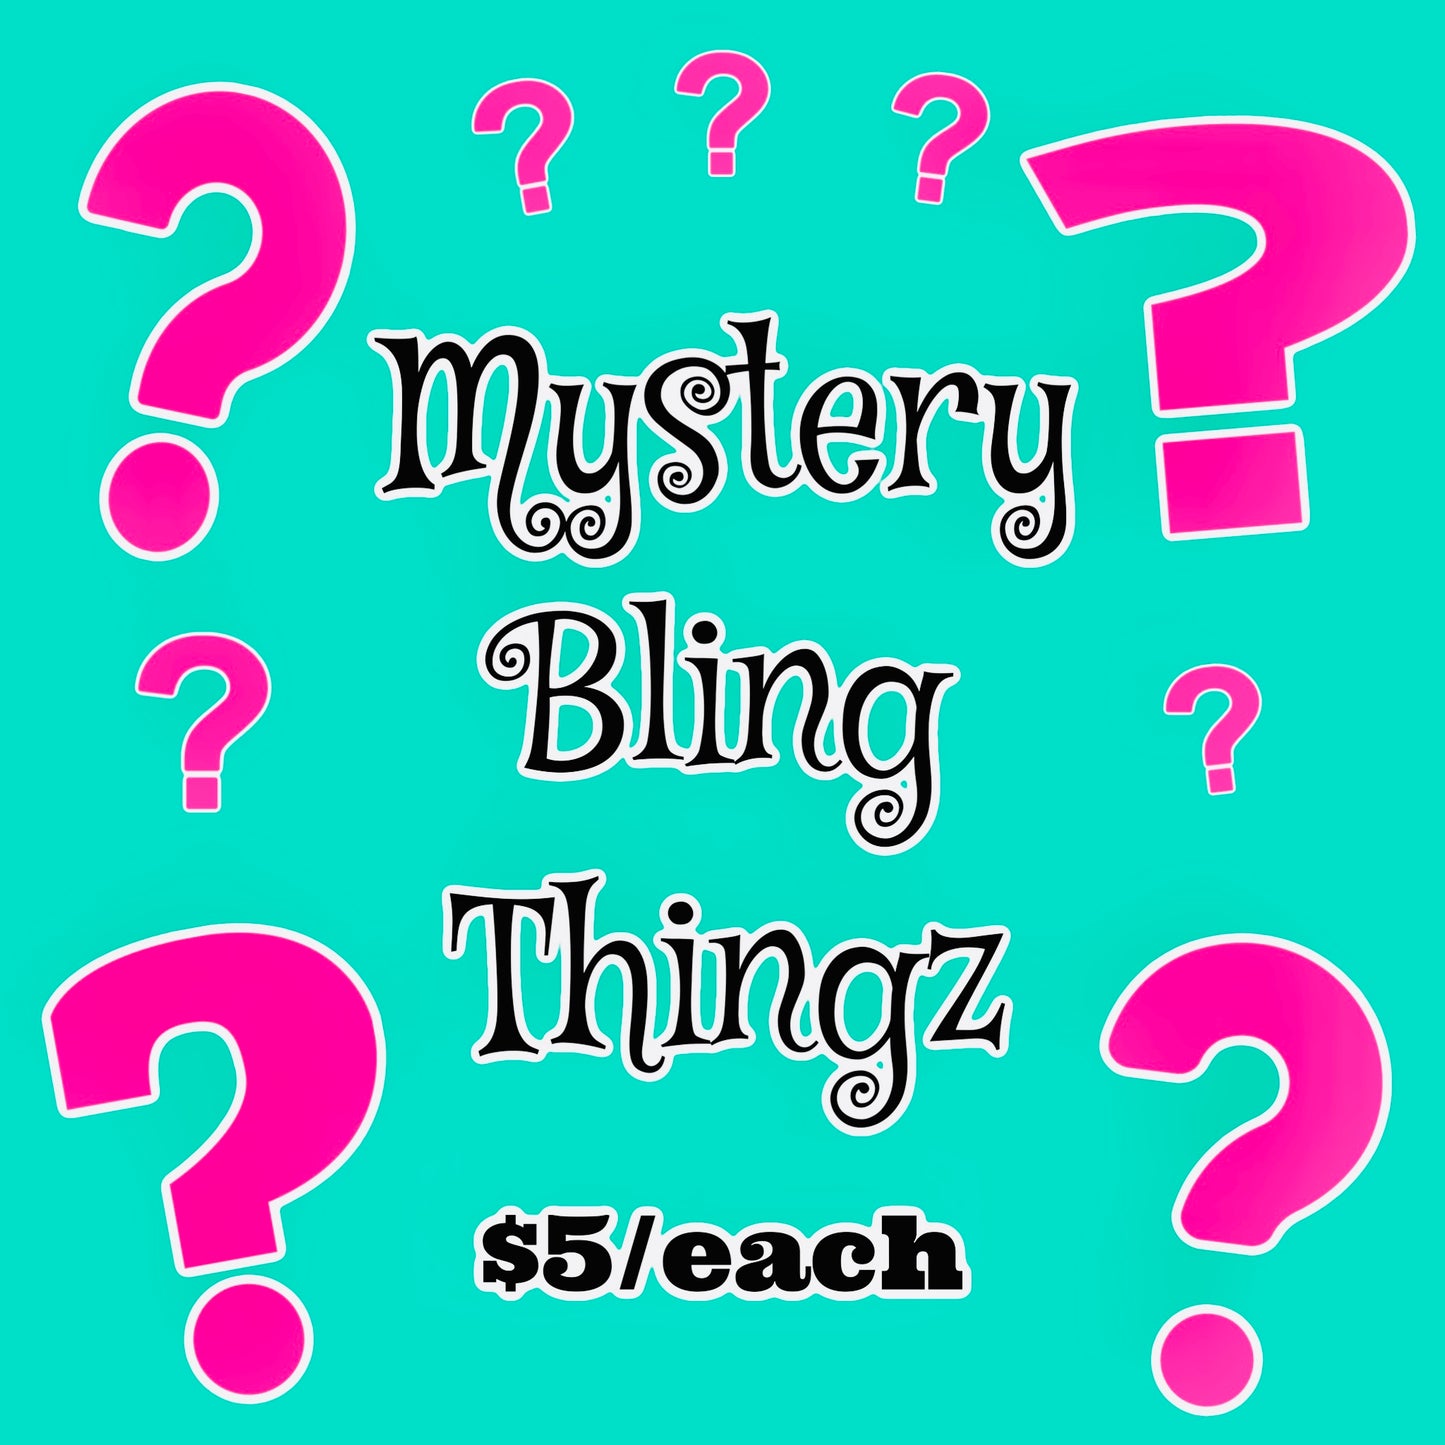 Mystery Bling Thingz - PLEASE DO NOT USE A DISCOUNT CODE ON THIS ITEM - Thank you so much 🩷